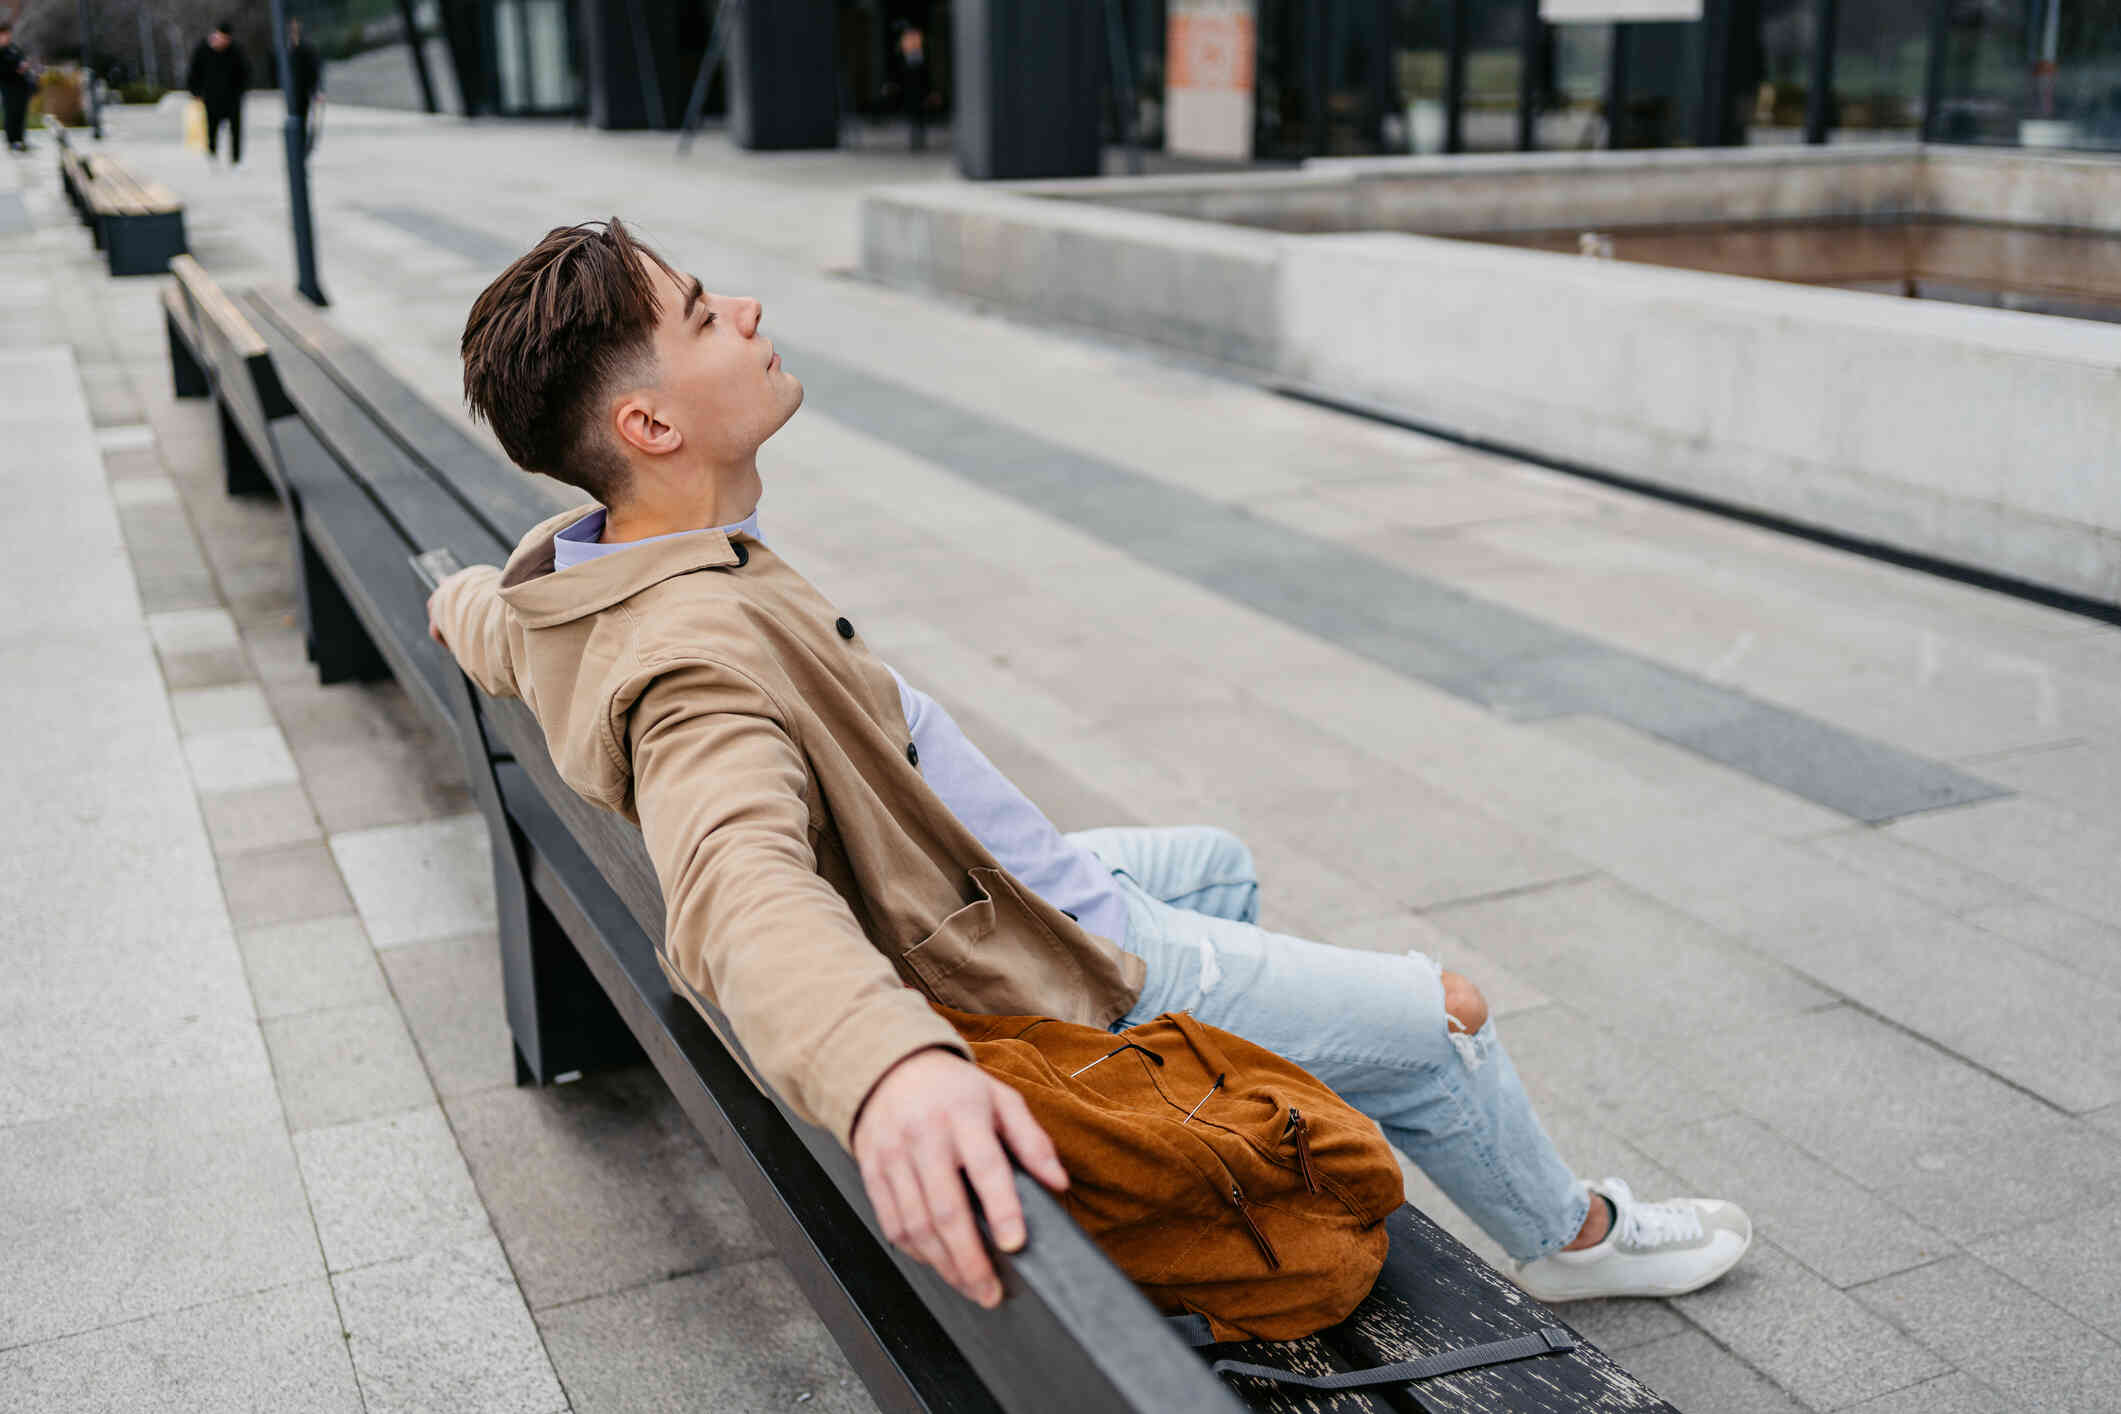 A man in a brown coat sits on a bench in the city with his arms resting on the back of the bench as he closes his eyes and lifts his head.